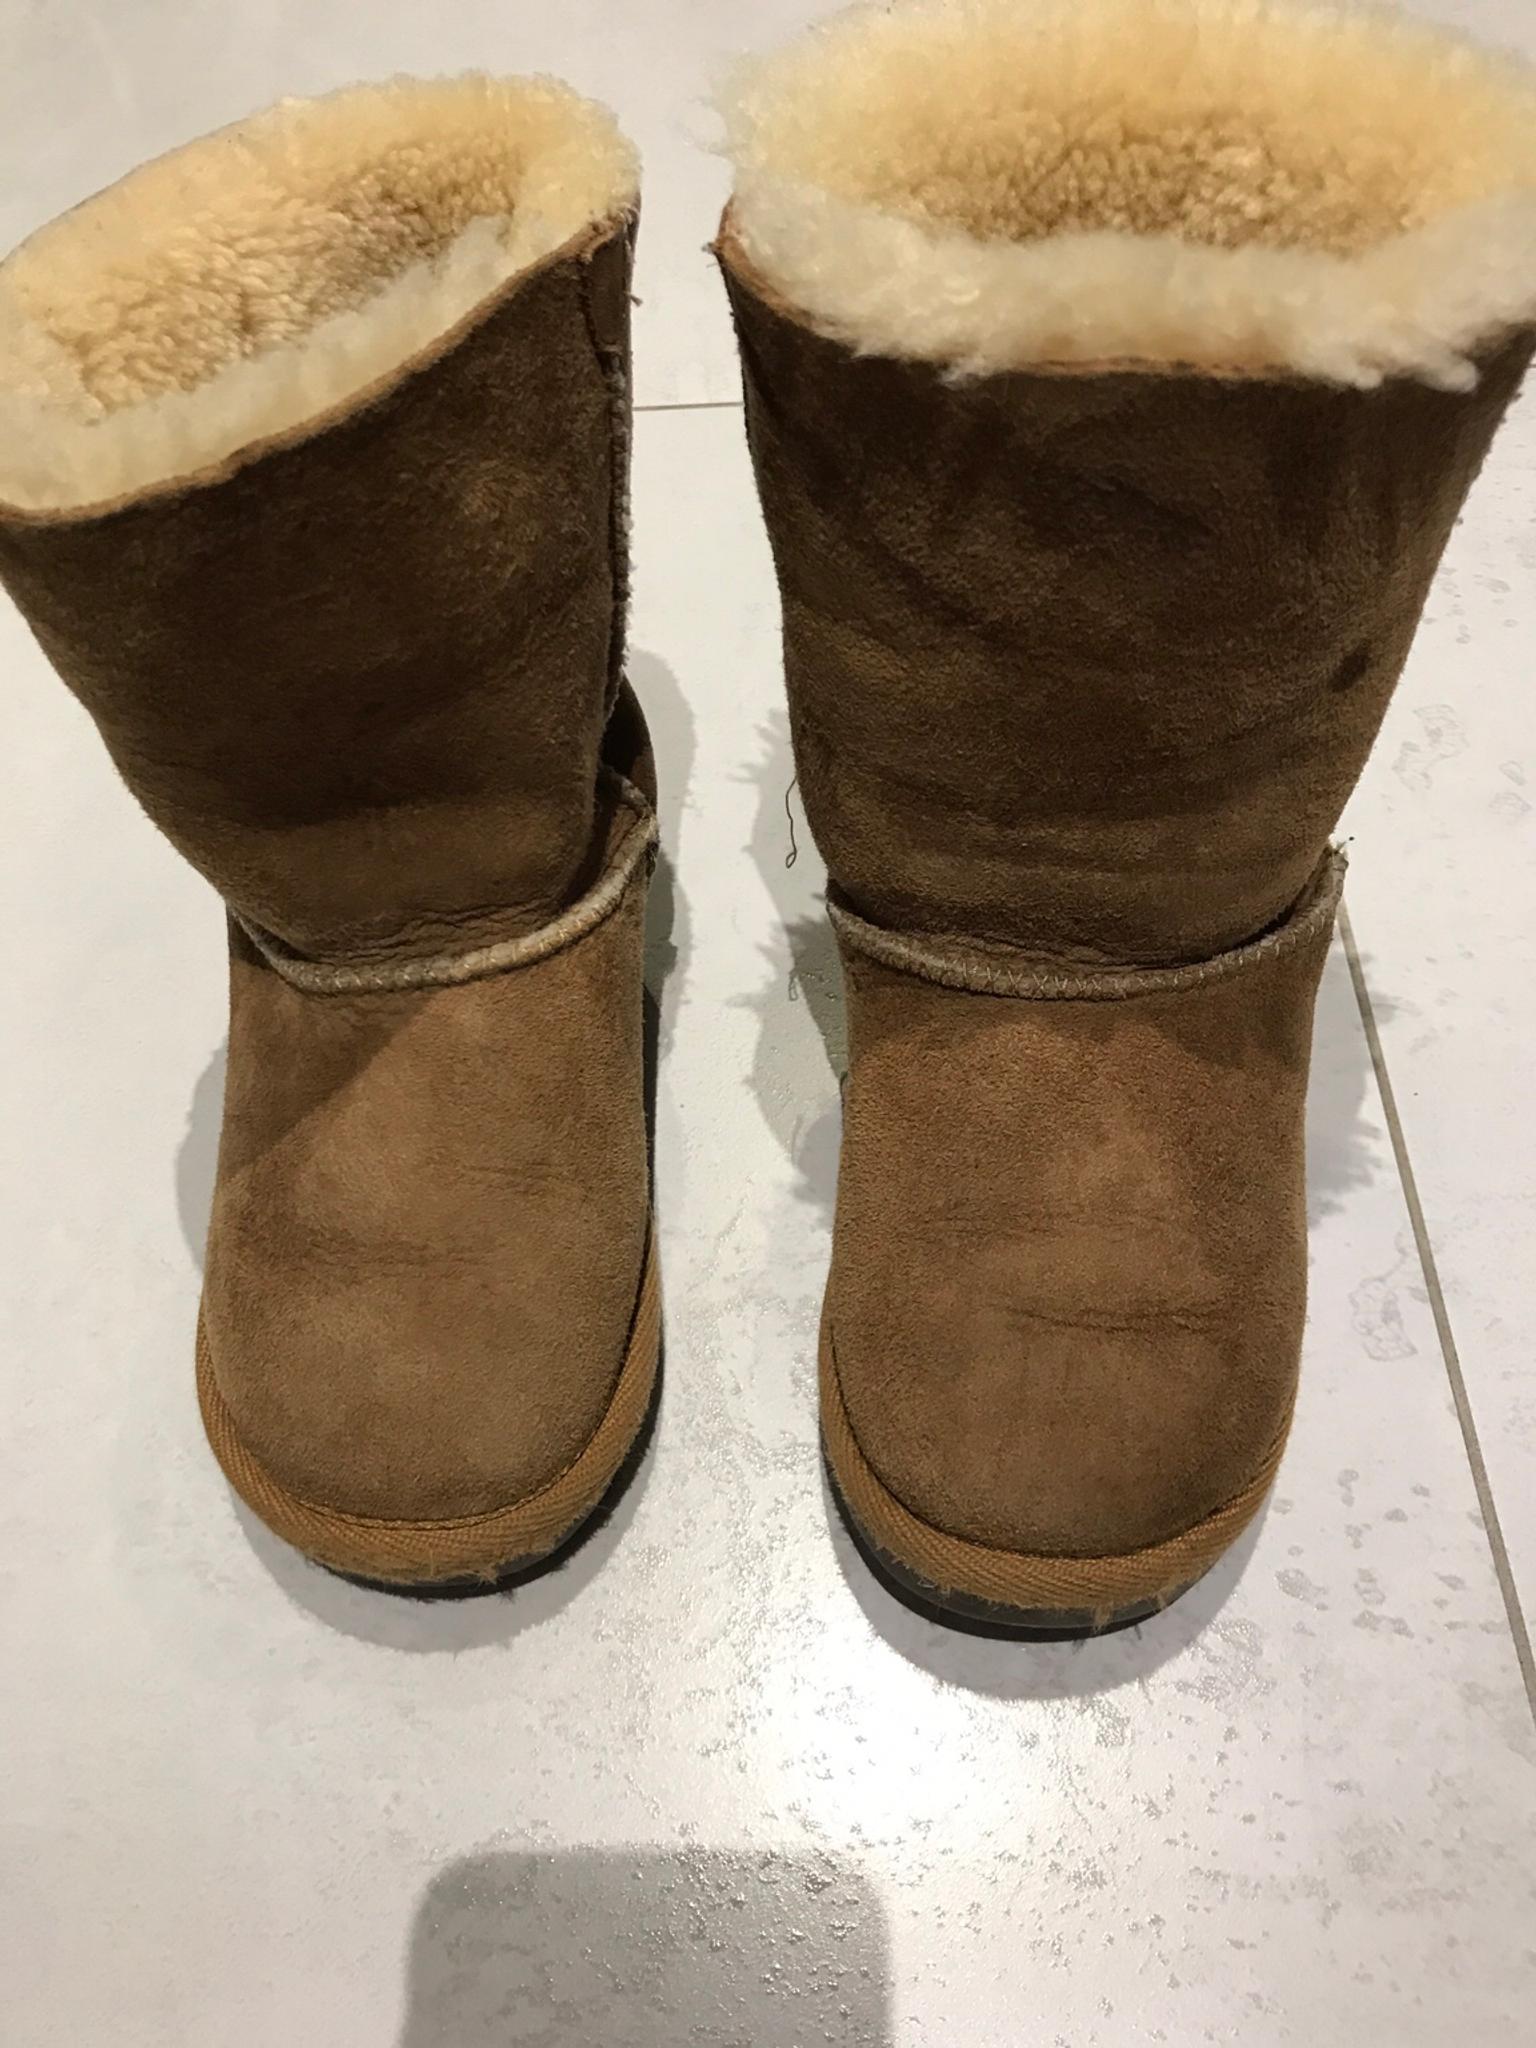 uggs type boots